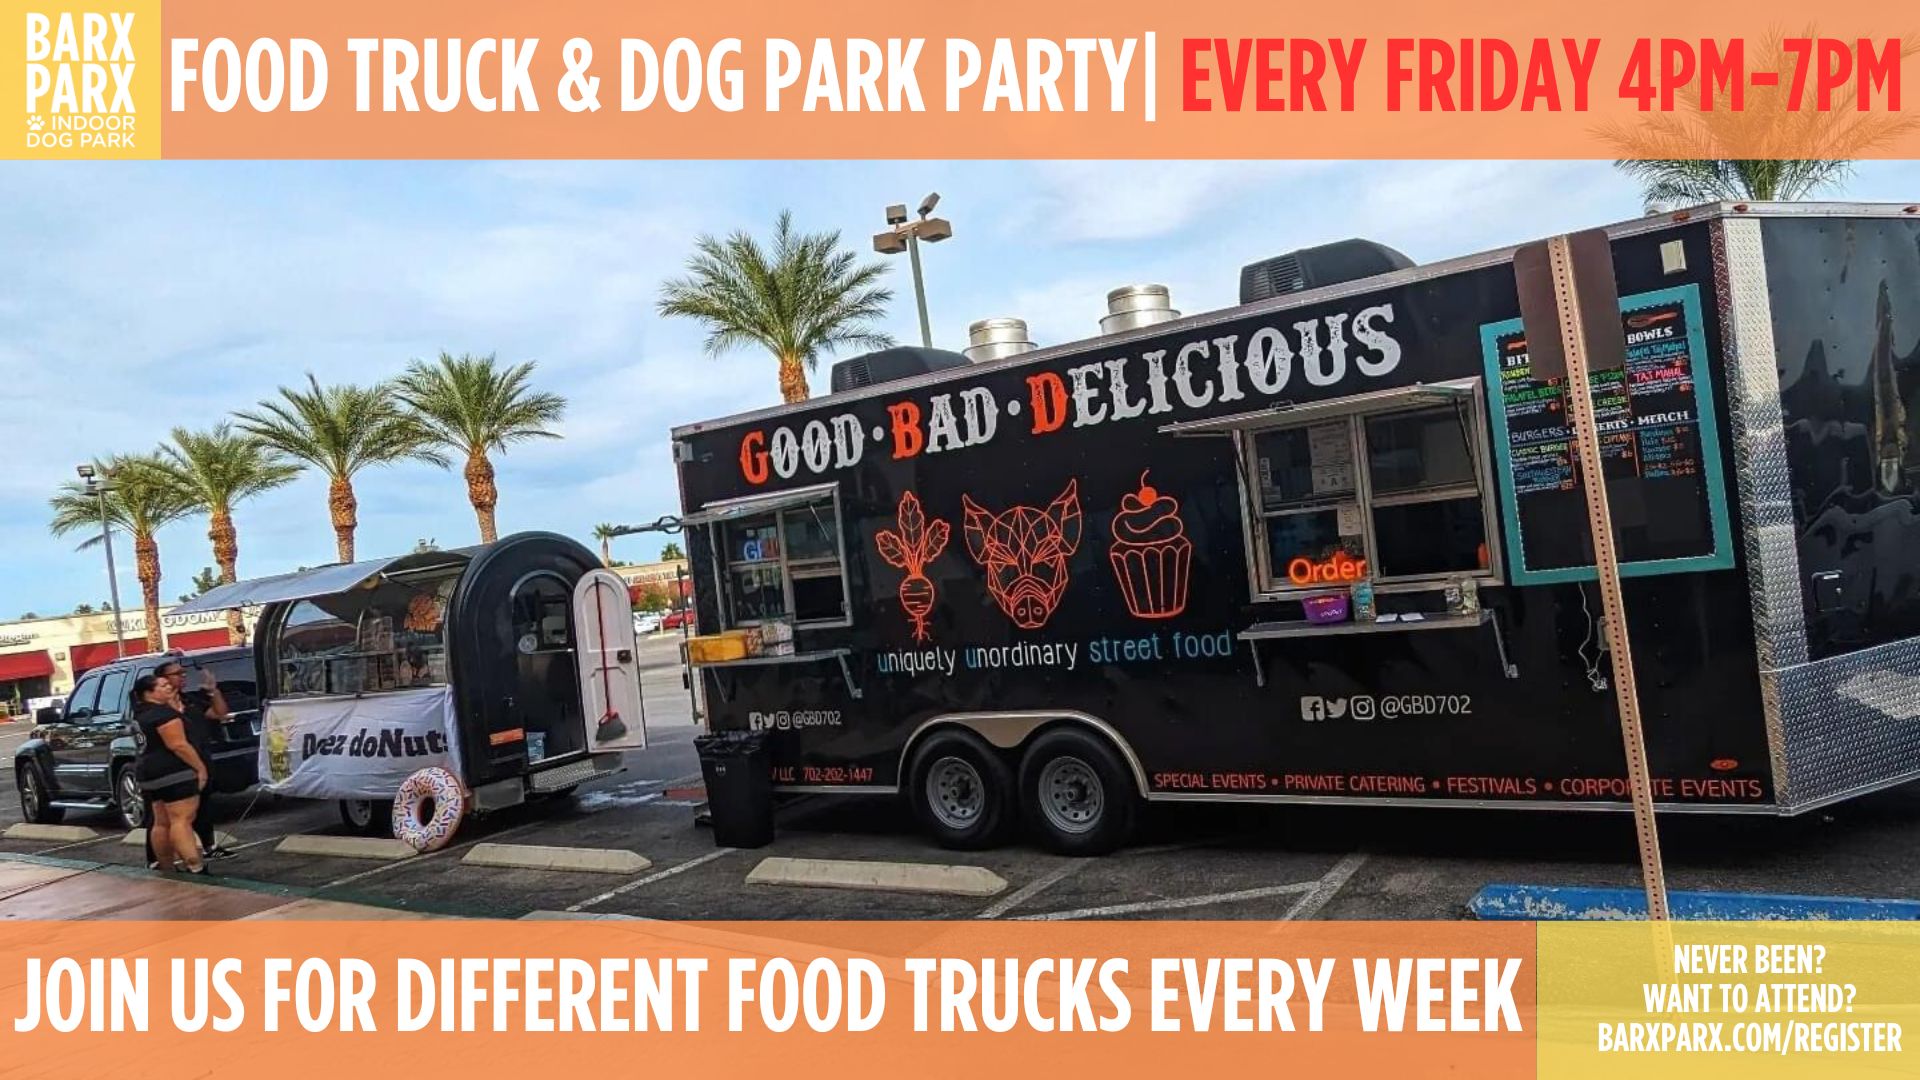 Food truck dog park party 3